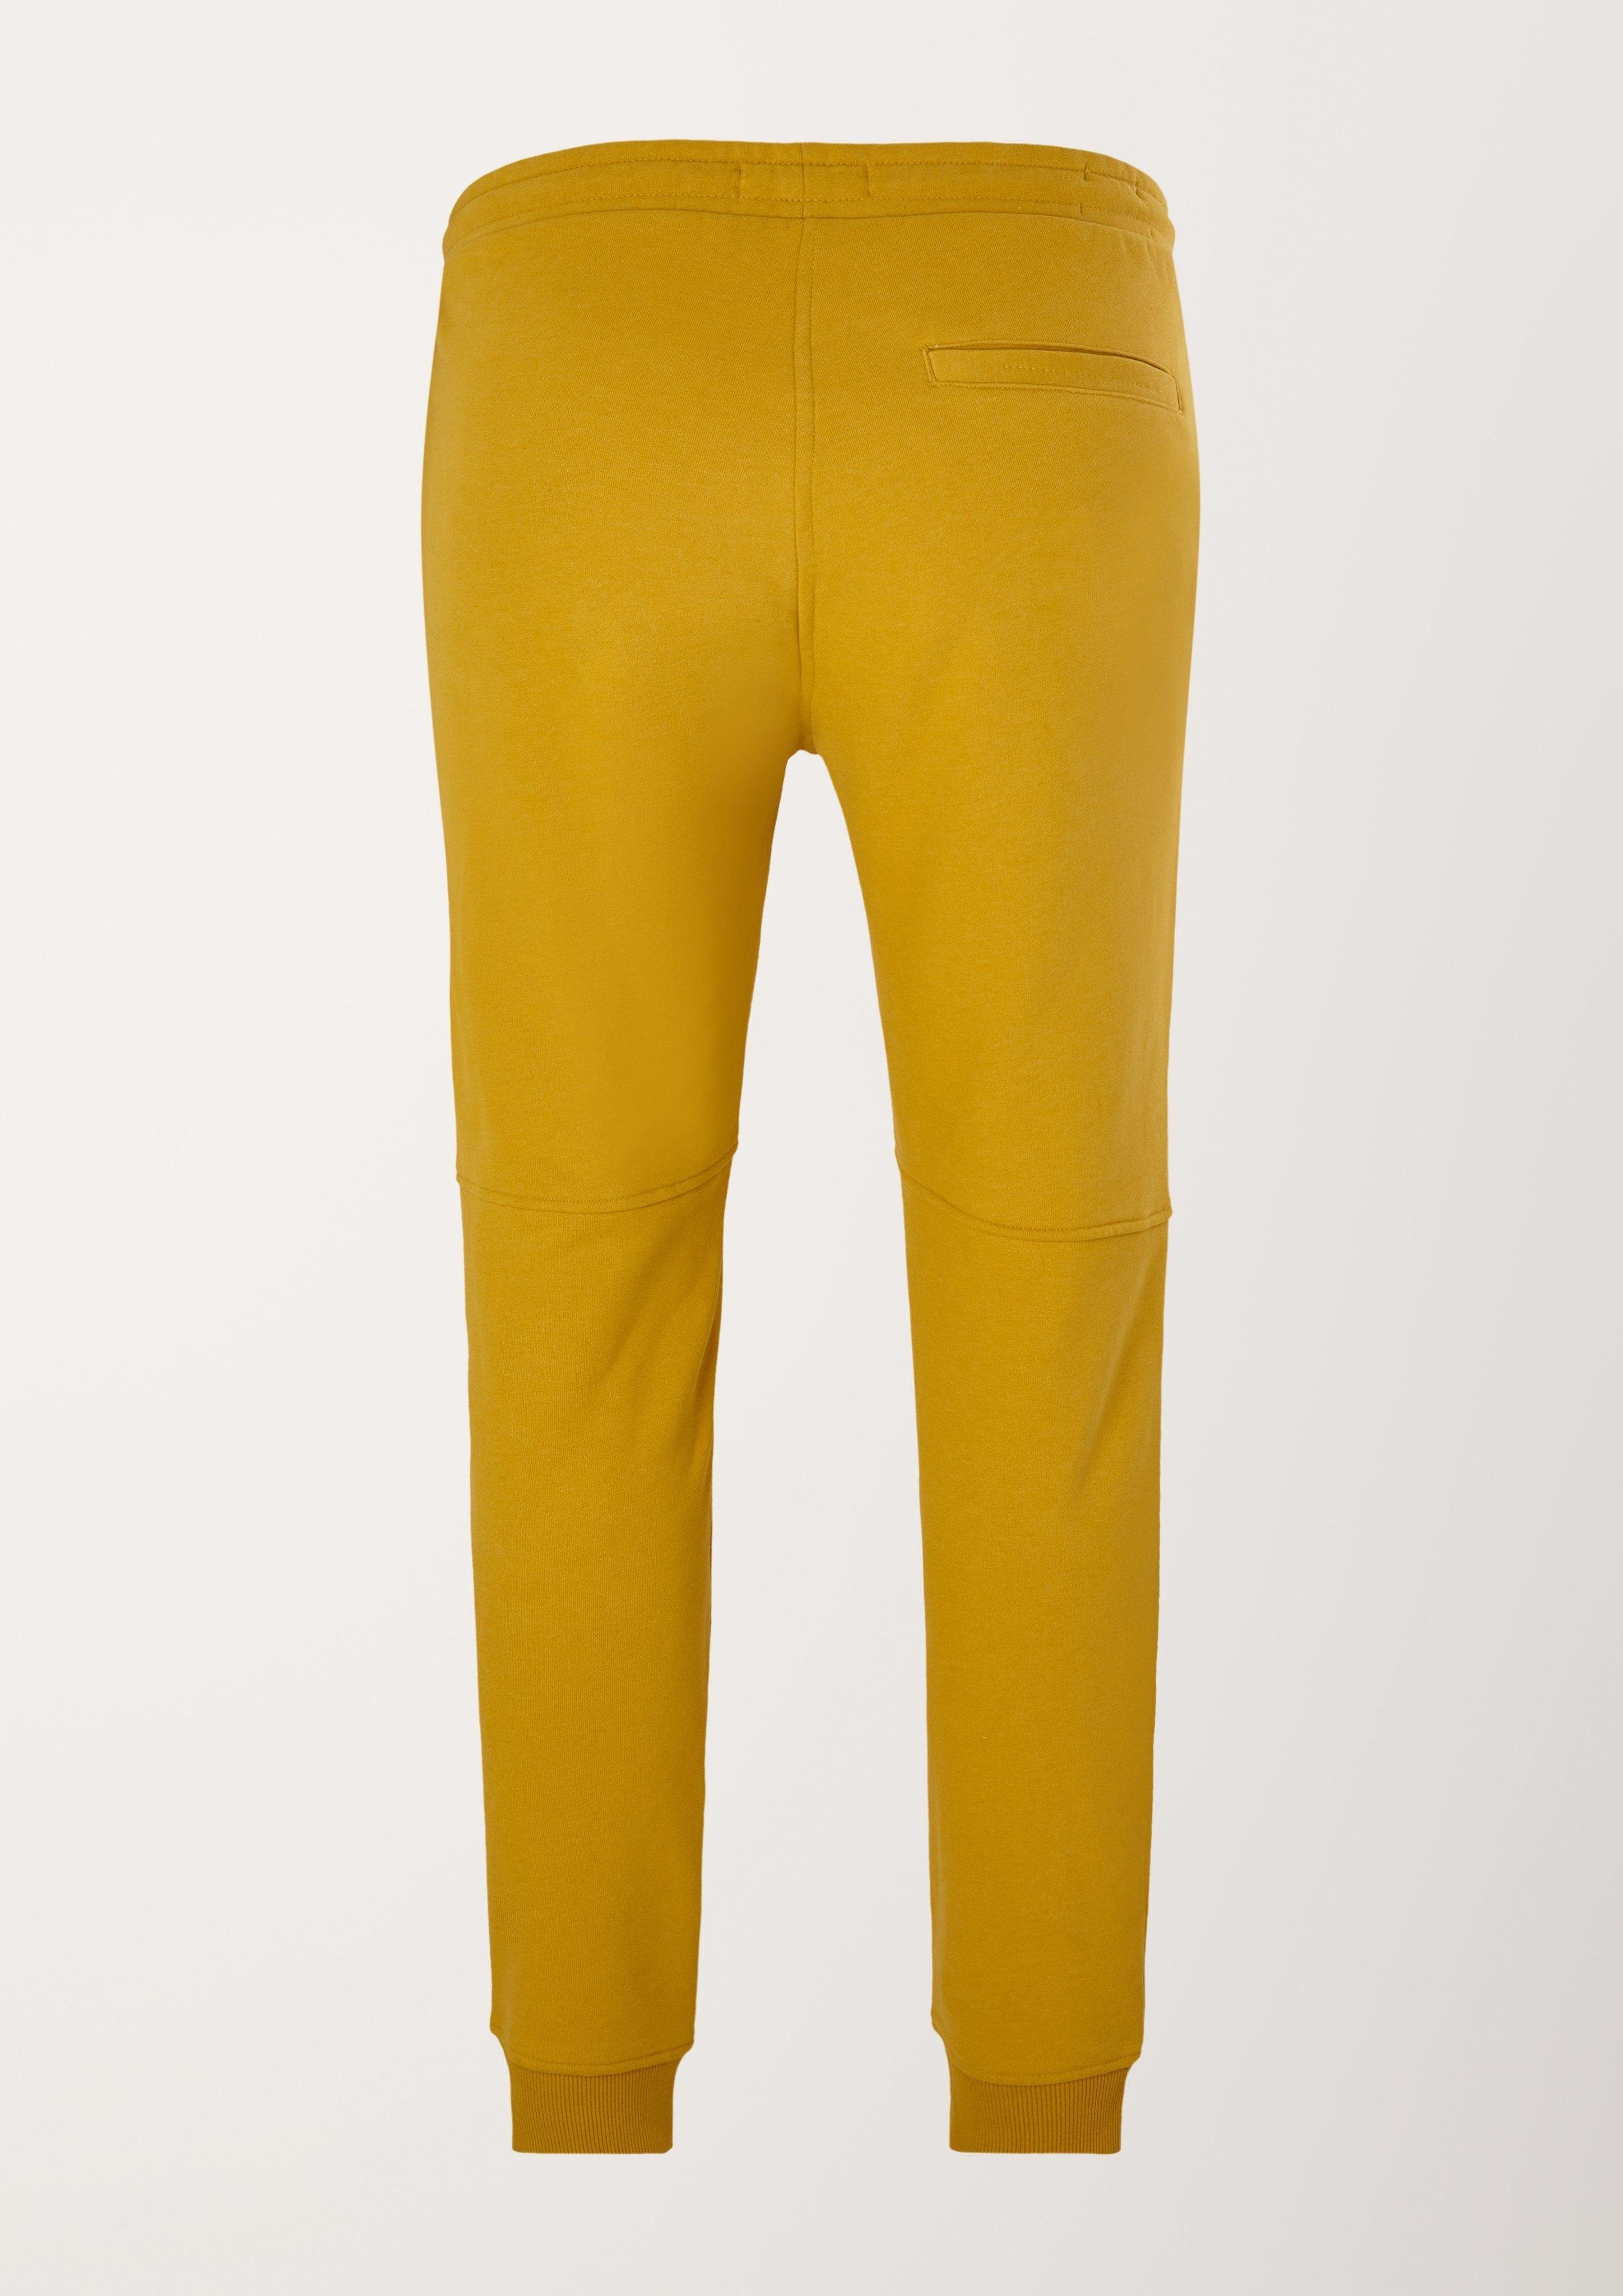 aus yellow Sweat Rippbündchen Stoffhose Jogger s.Oliver Relaxed: